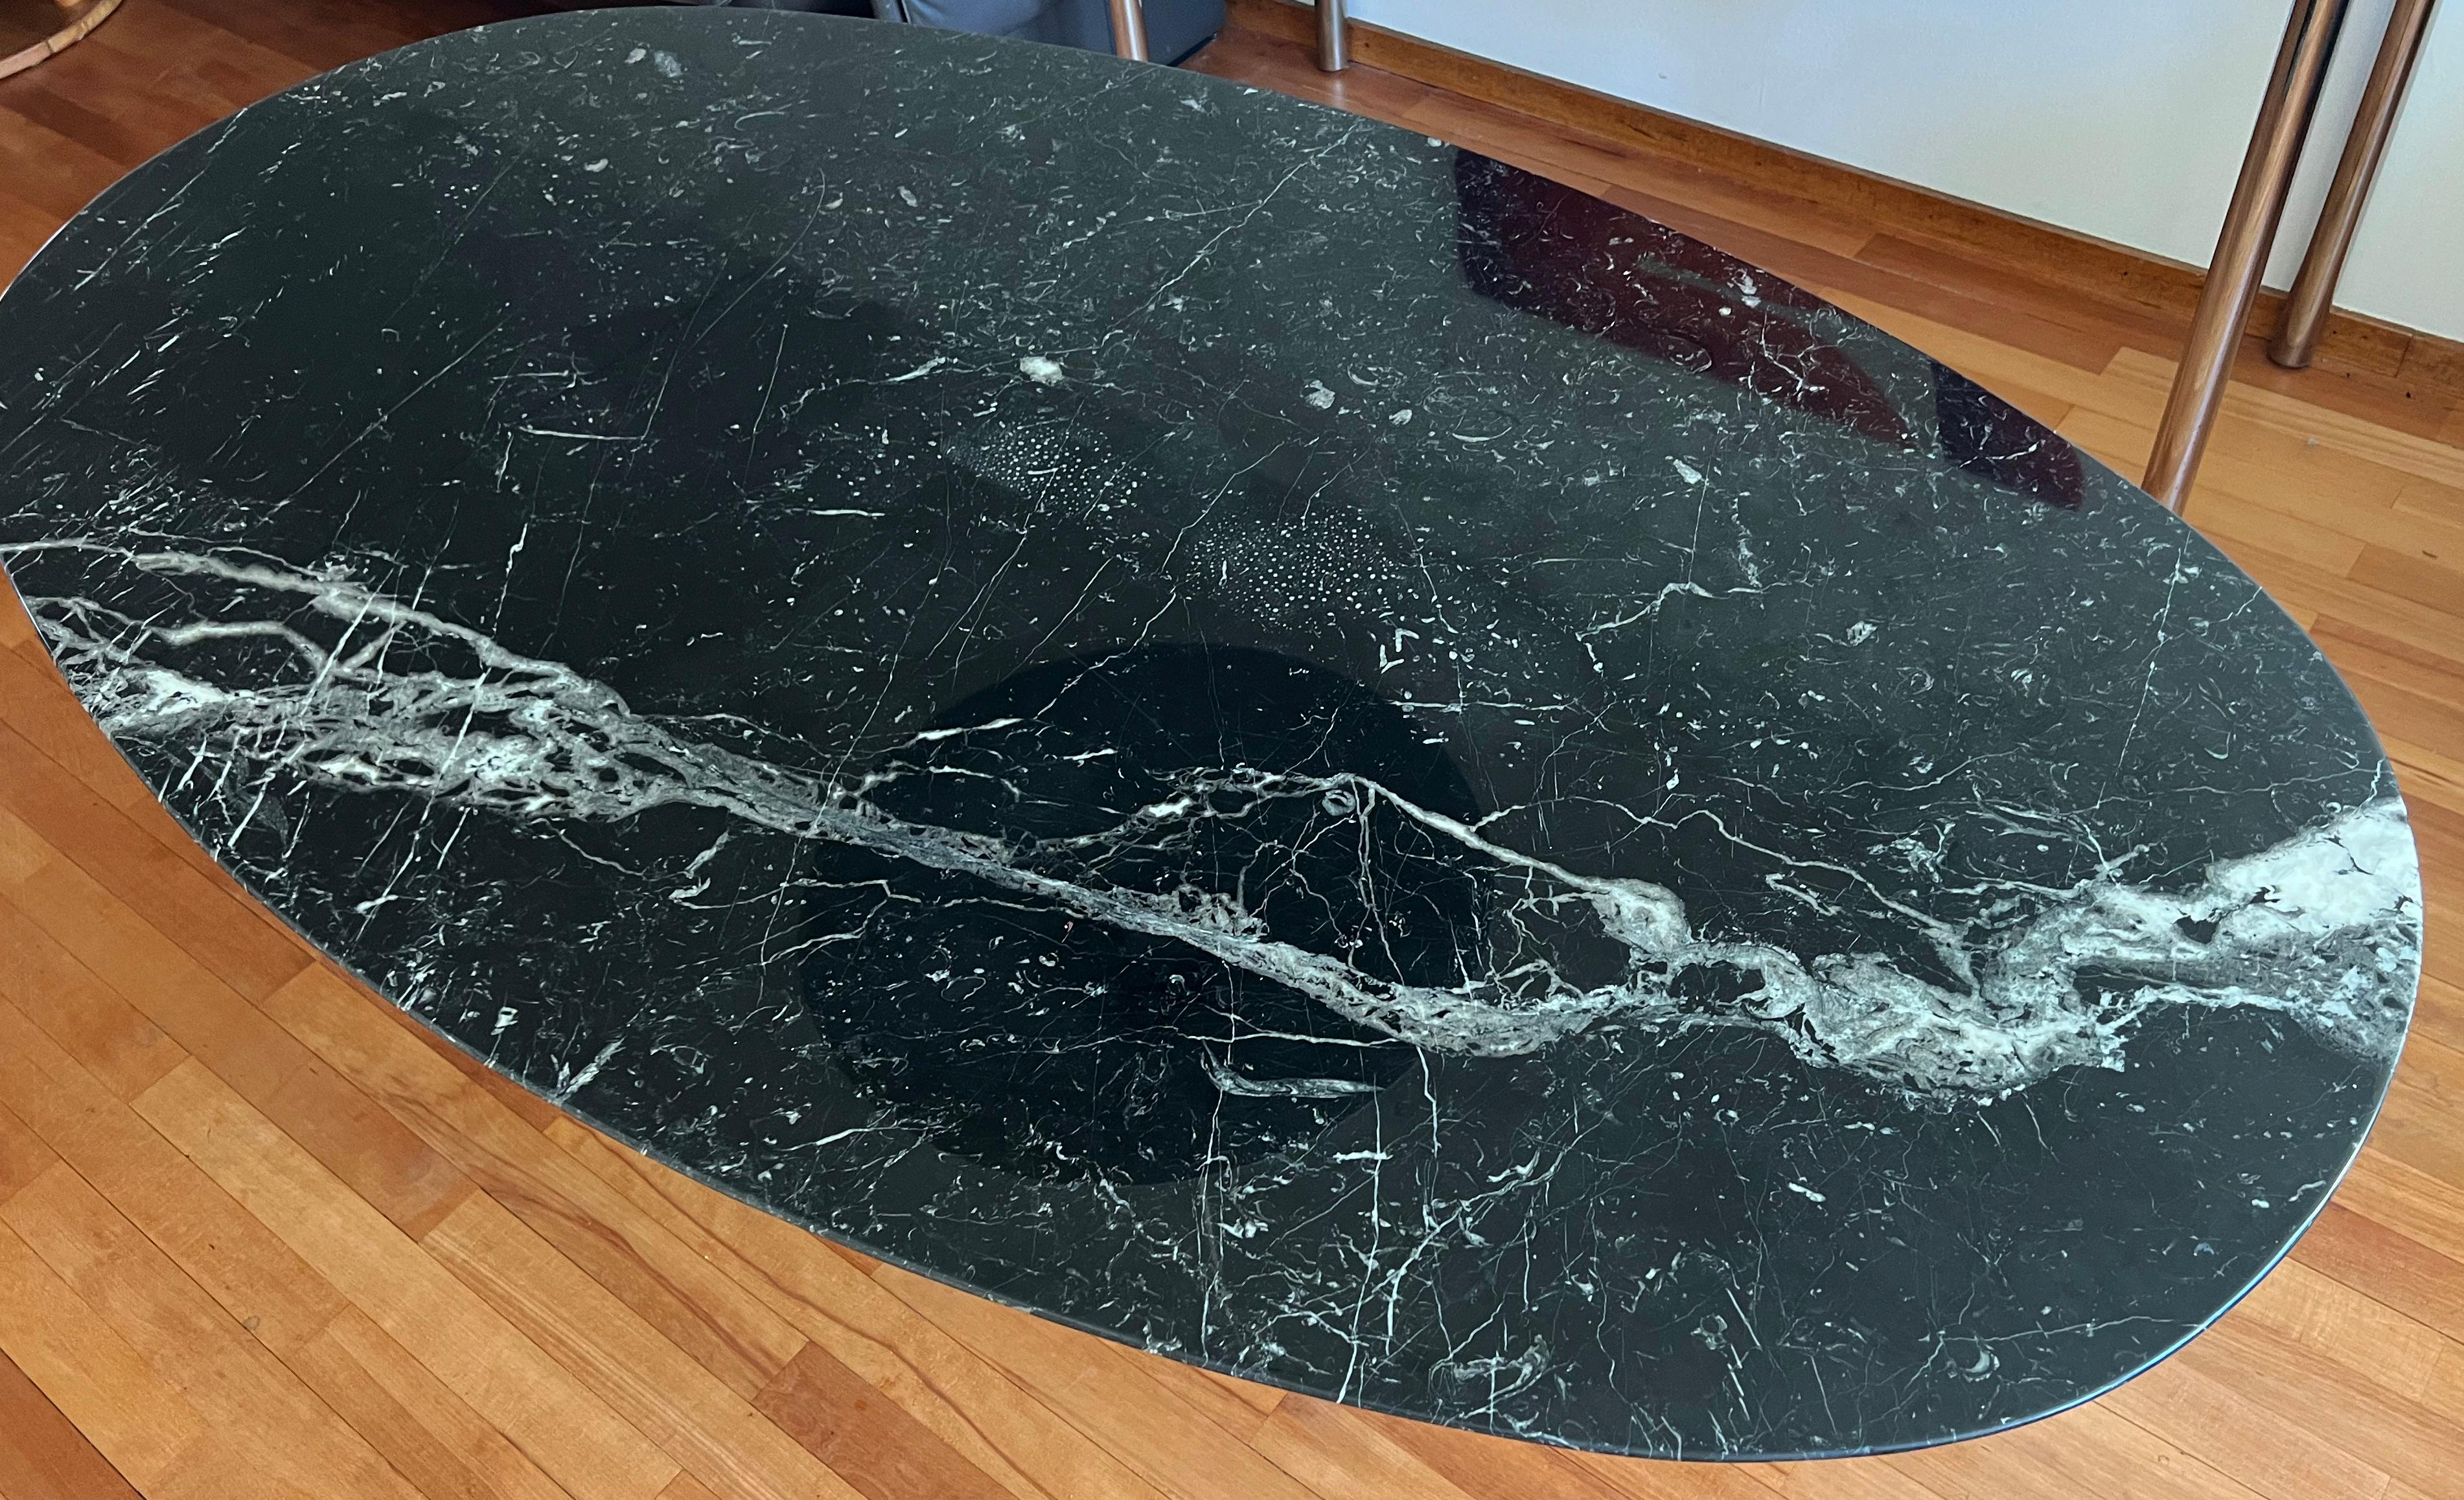 black marble oval table